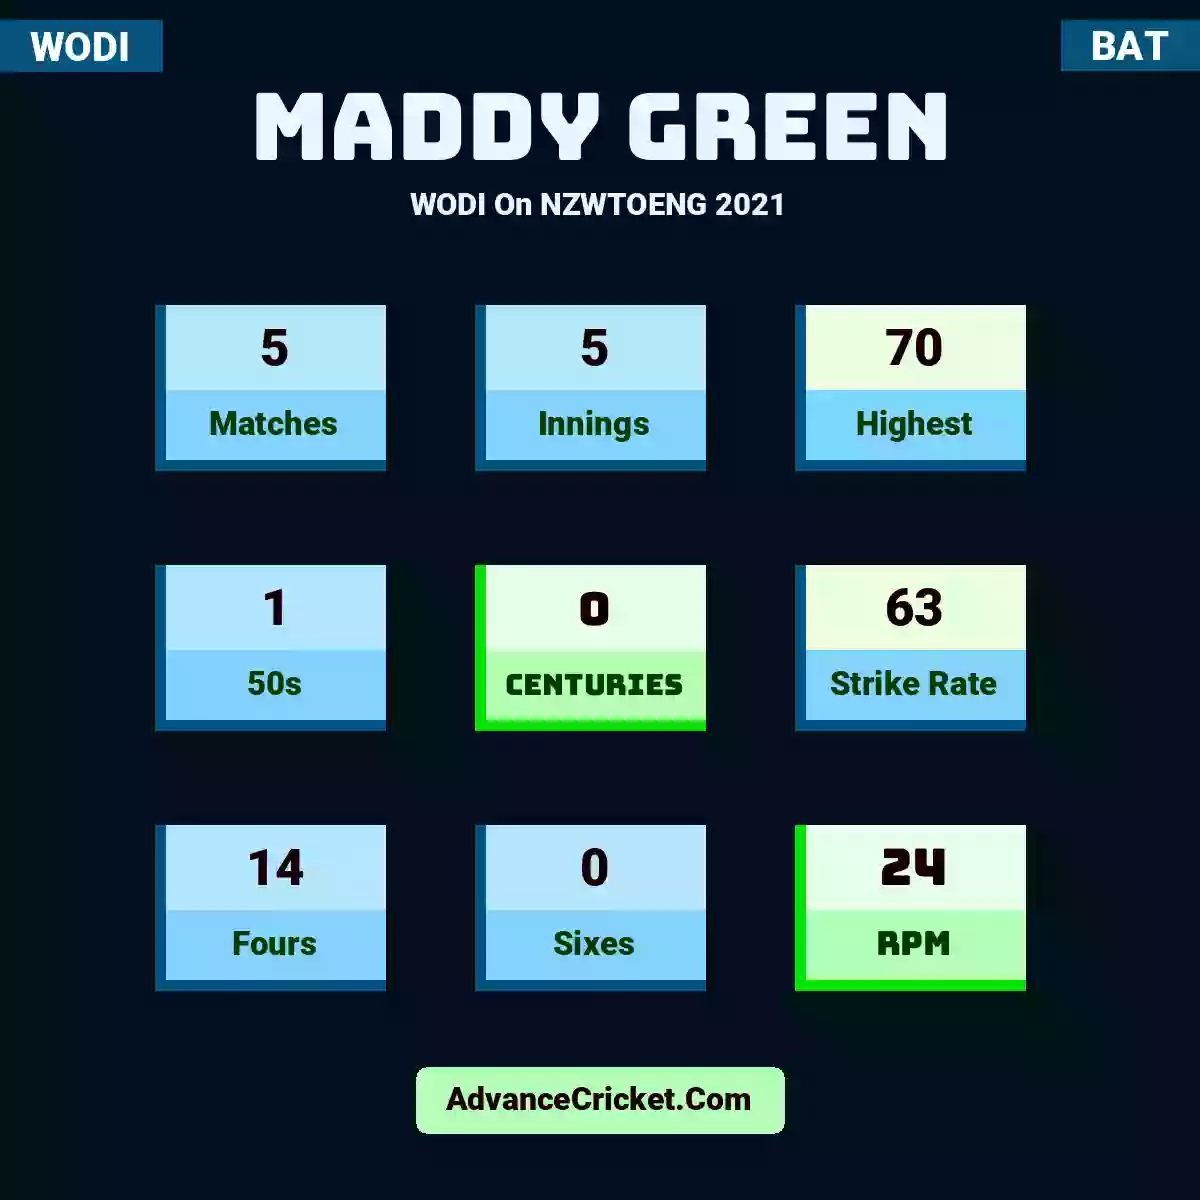 Maddy Green WODI  On NZWTOENG 2021, Maddy Green played 5 matches, scored 70 runs as highest, 1 half-centuries, and 0 centuries, with a strike rate of 63. M.Green hit 14 fours and 0 sixes, with an RPM of 24.